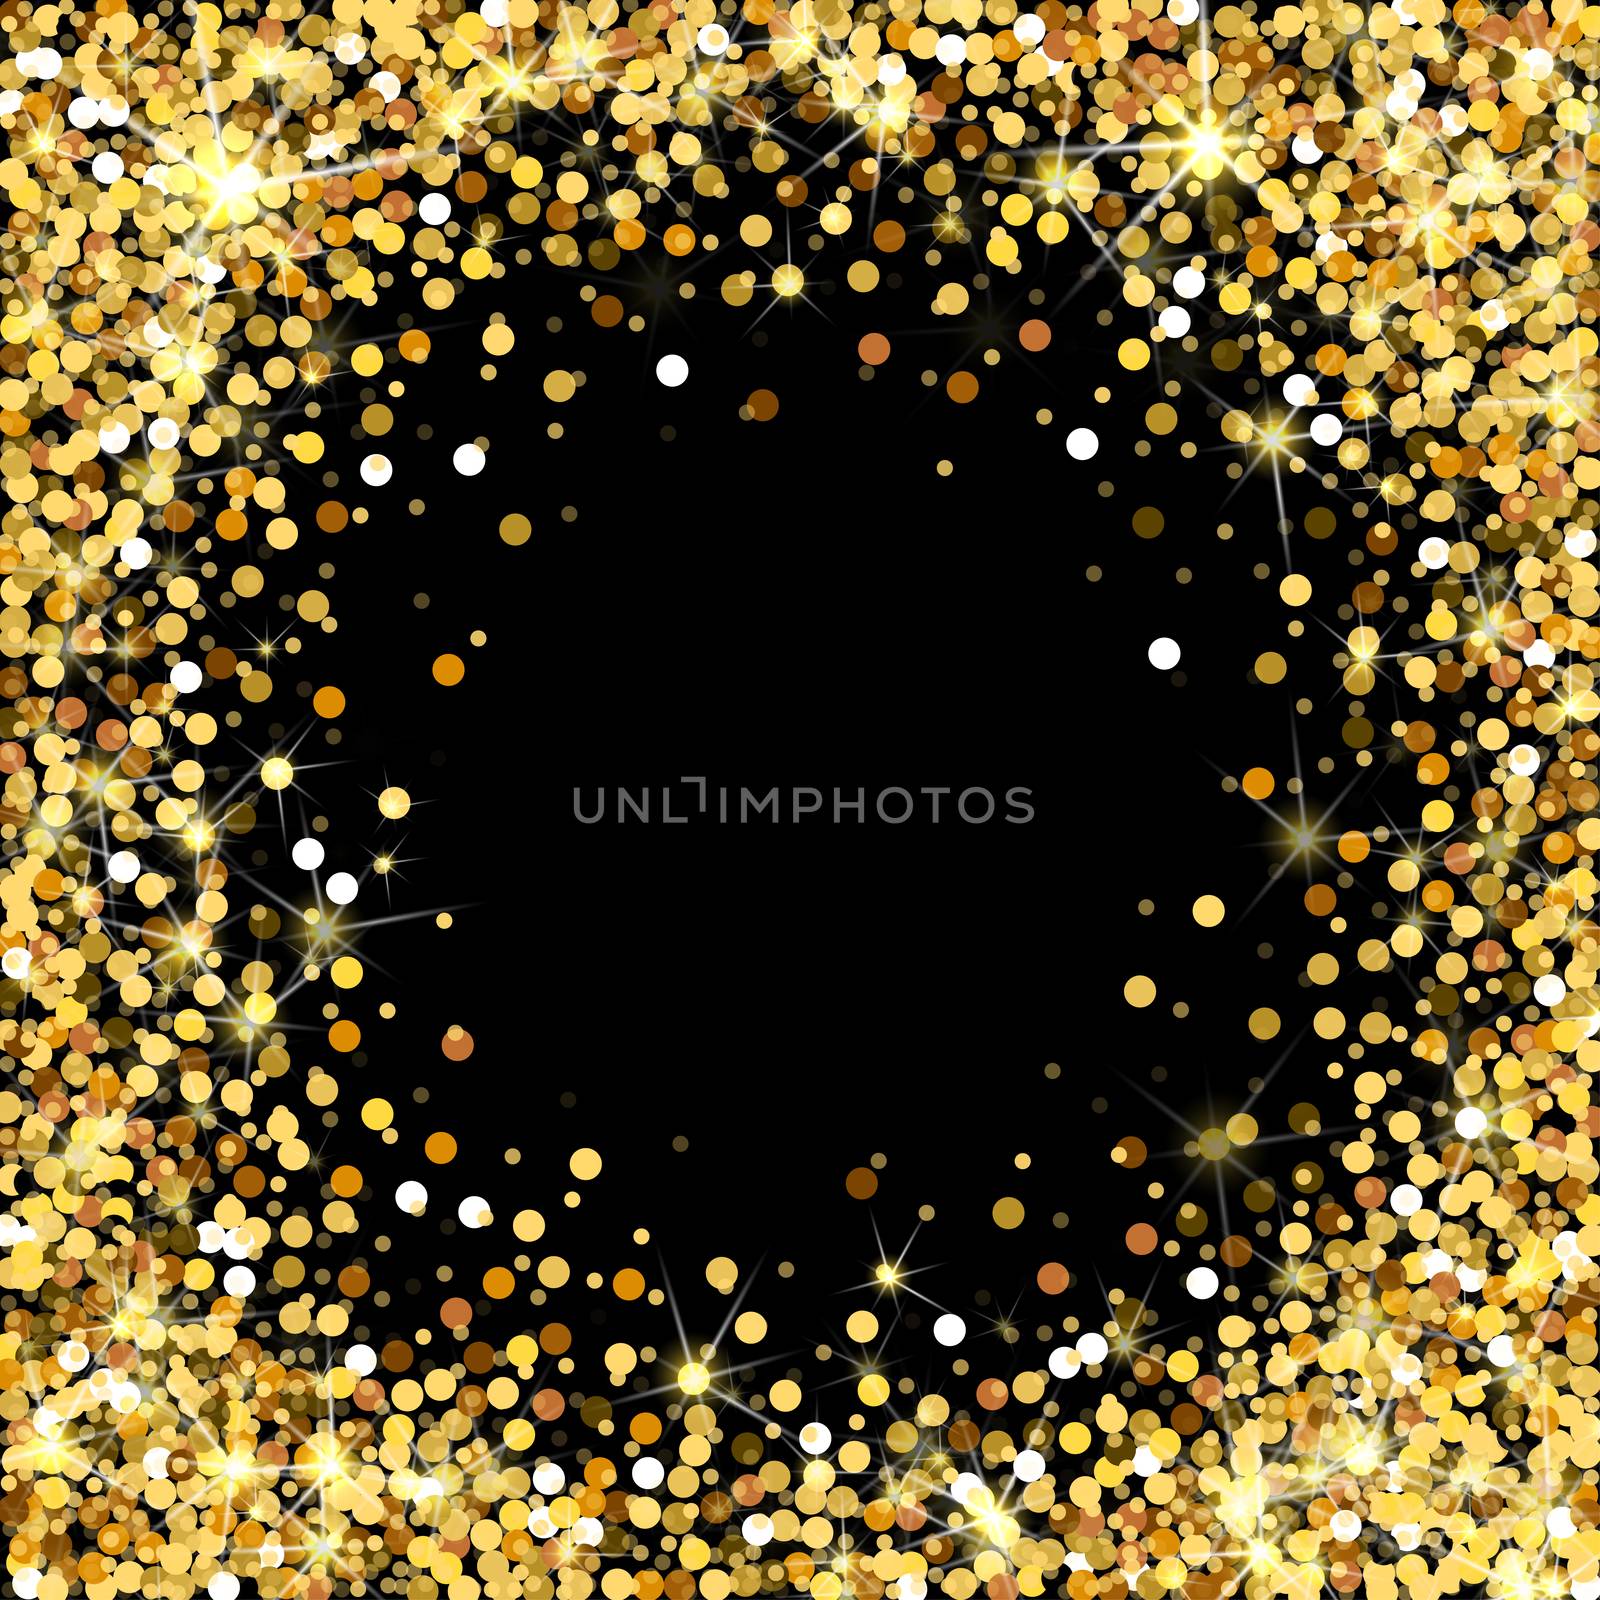 Gold glitter frame with empty space for text. Scattered golden confetti. Bright shining gold. Rich luxury fashion glitter backdrop. Golden round dots.